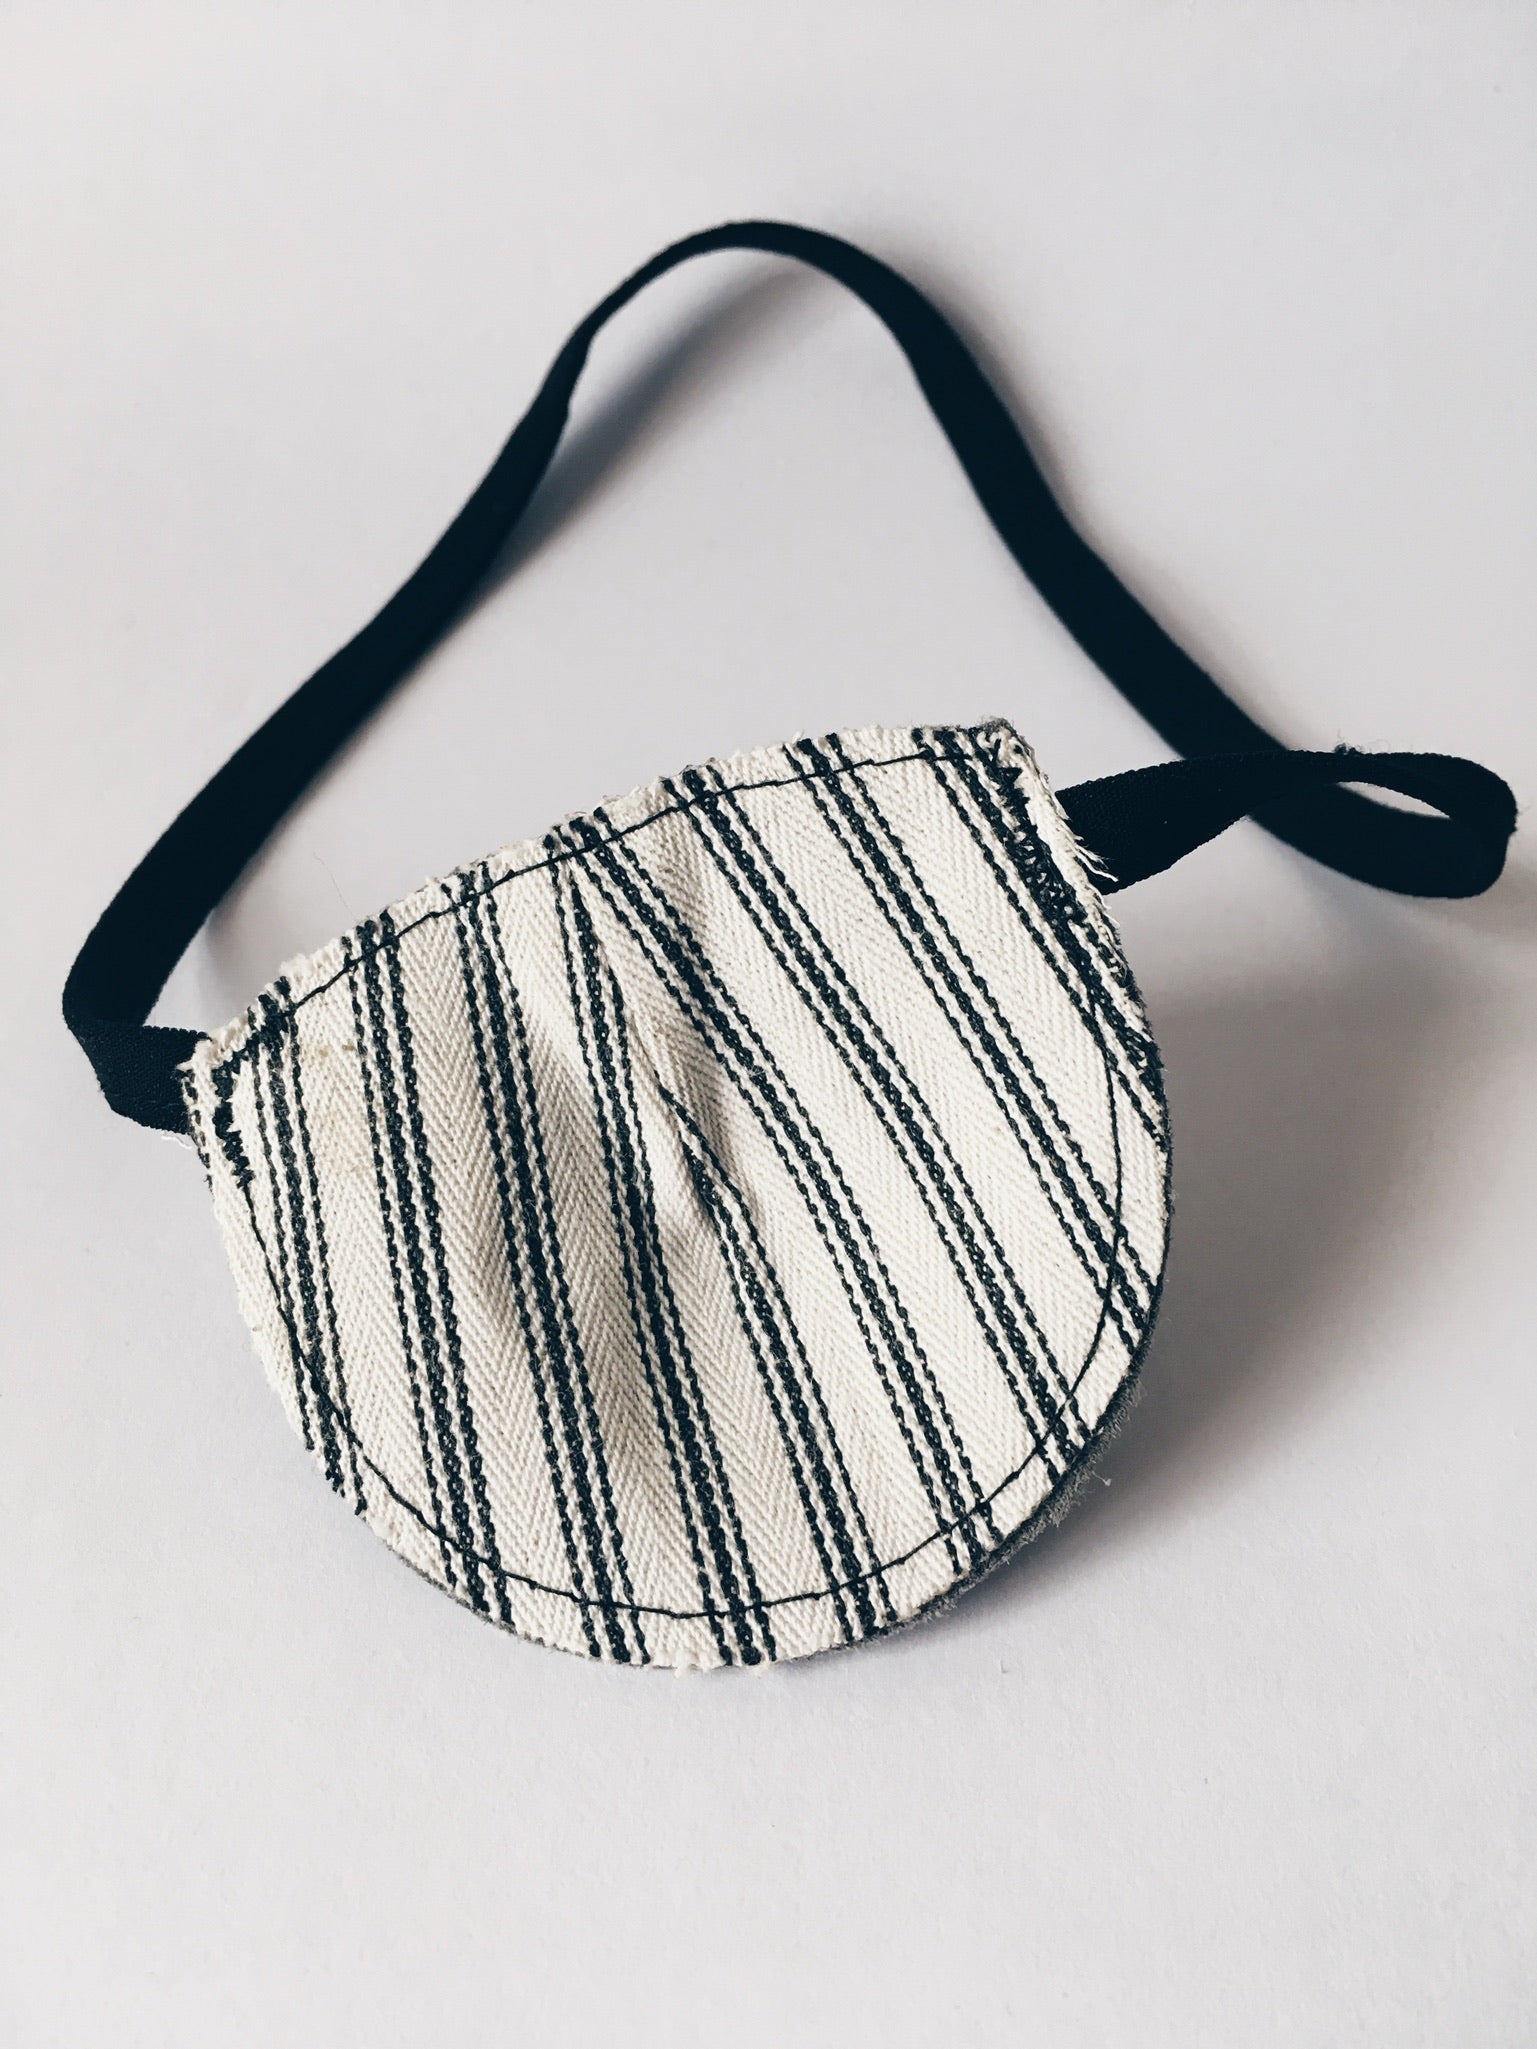 ticking stripe lining of Leather Pirate eye patch by For Just ONE Day